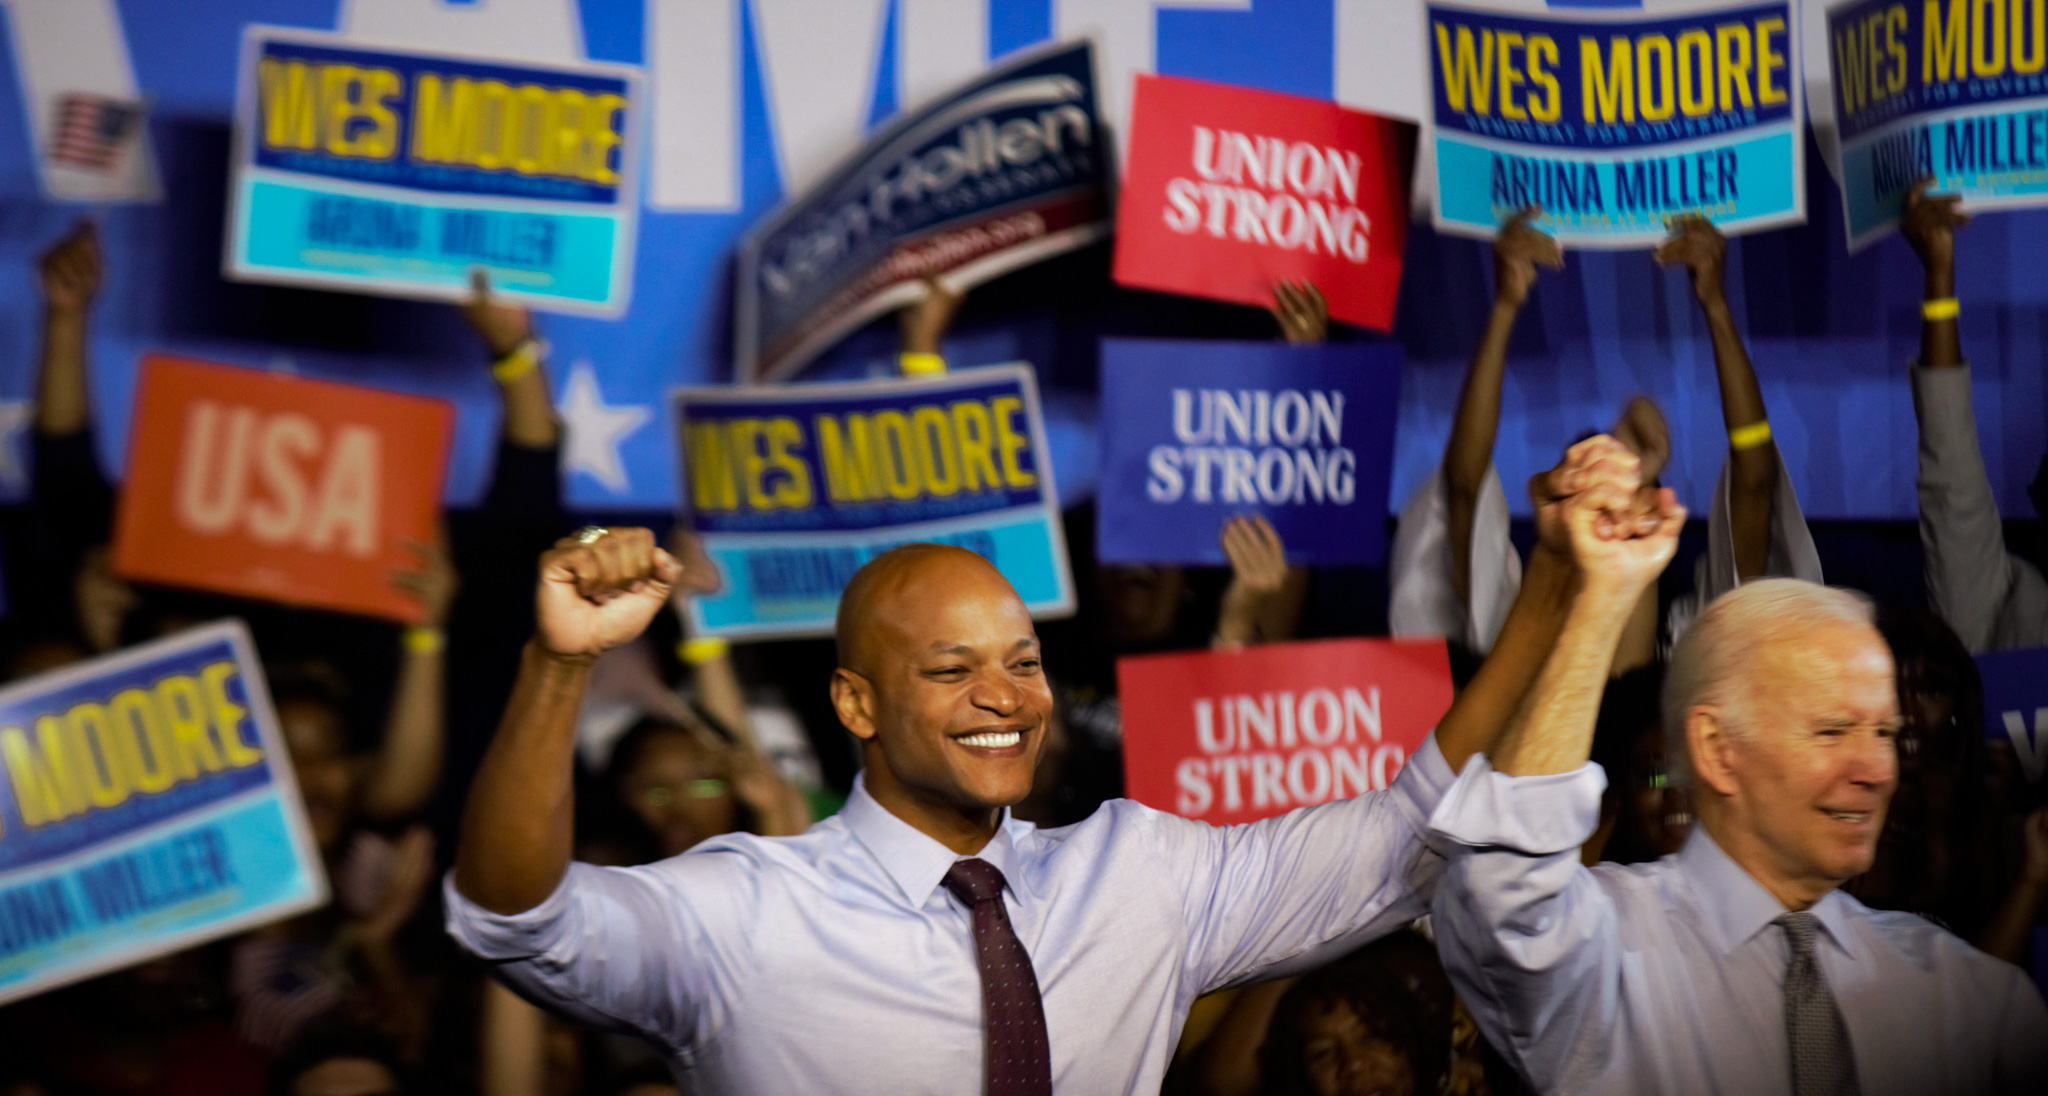 Wes Moore Cruises to Victory in Maryland Gubernatorial Race